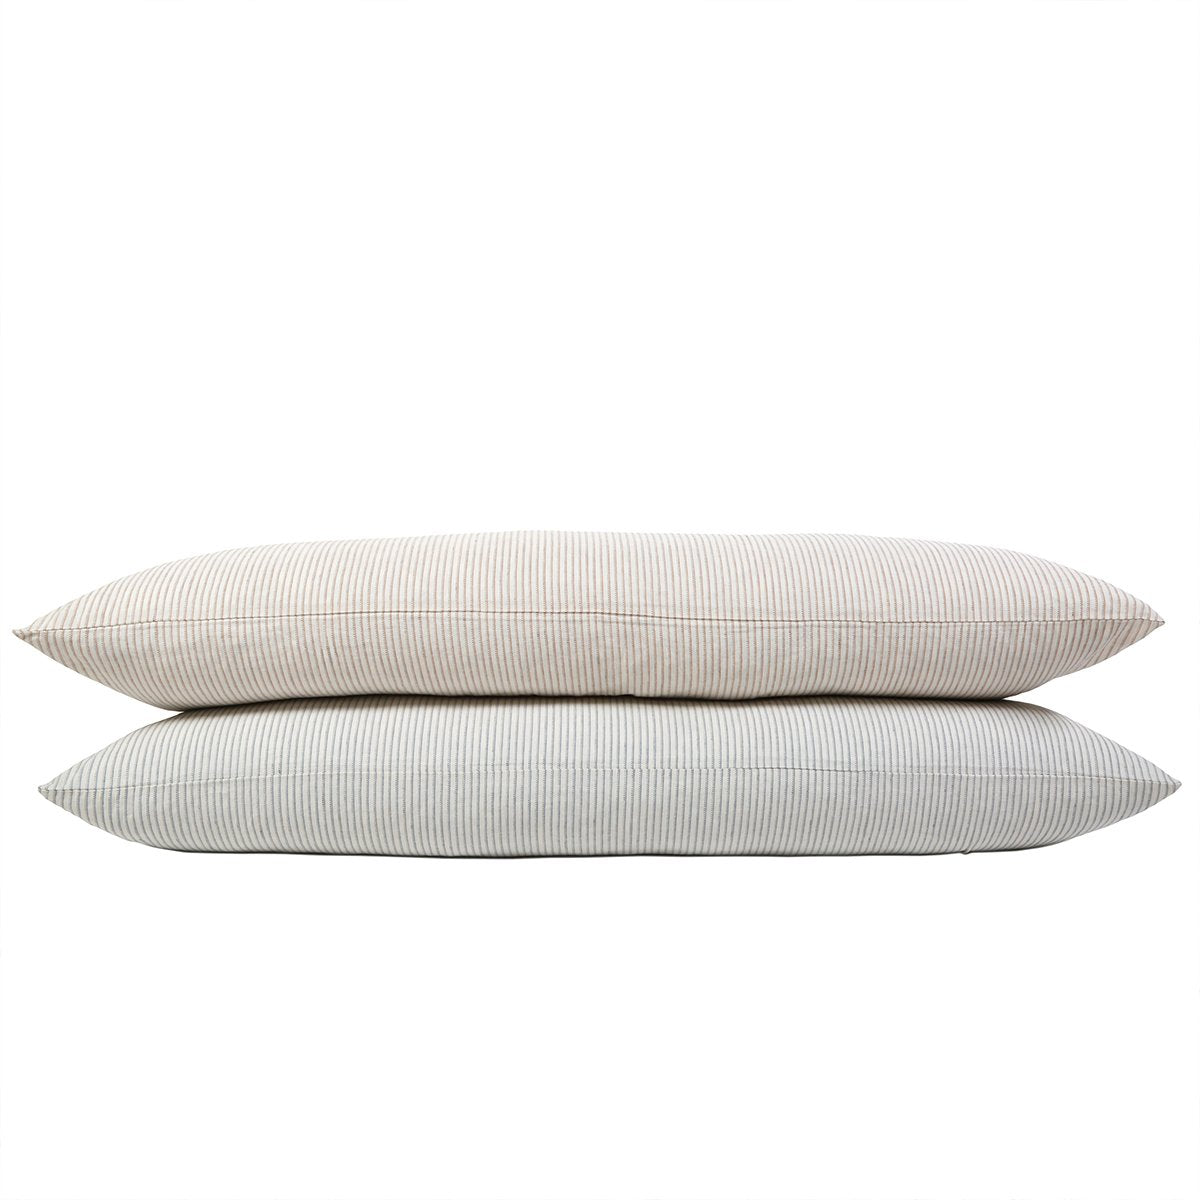 Ariel Hand Woven Big Pillow by Pom Pom at Home